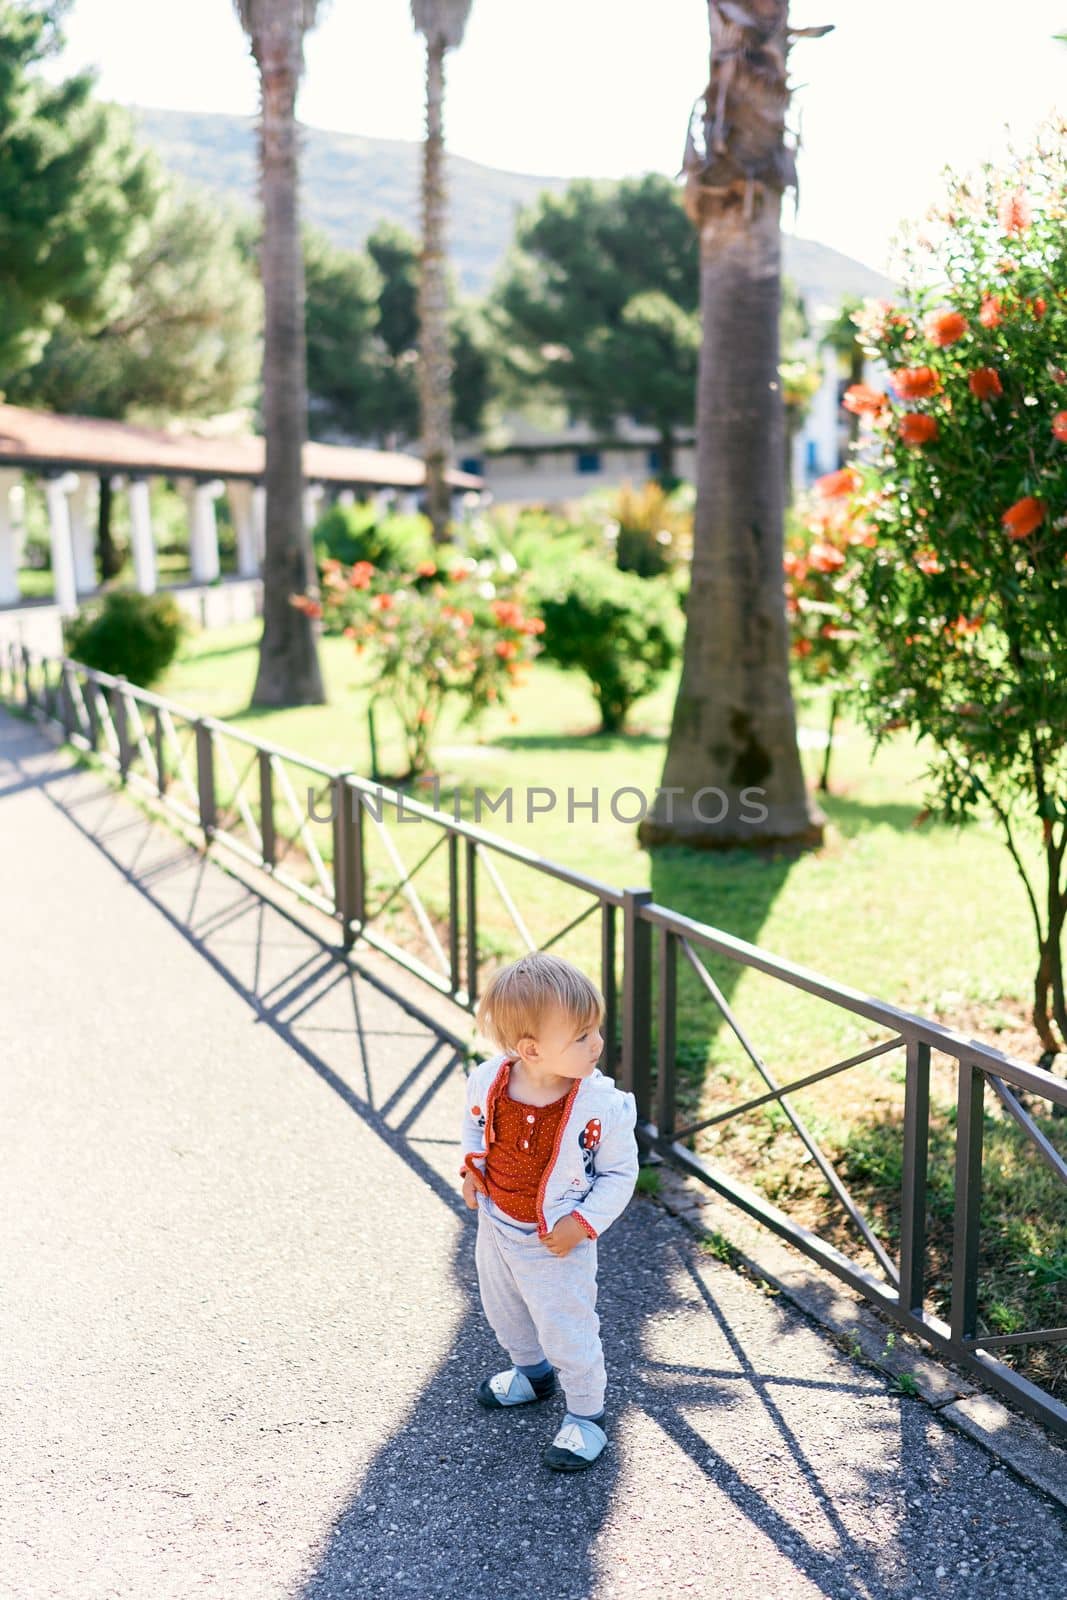 Budva, Montenegro - 21.06.2021: Kid stands on the path in the garden near the metal fence, turning his head by Nadtochiy